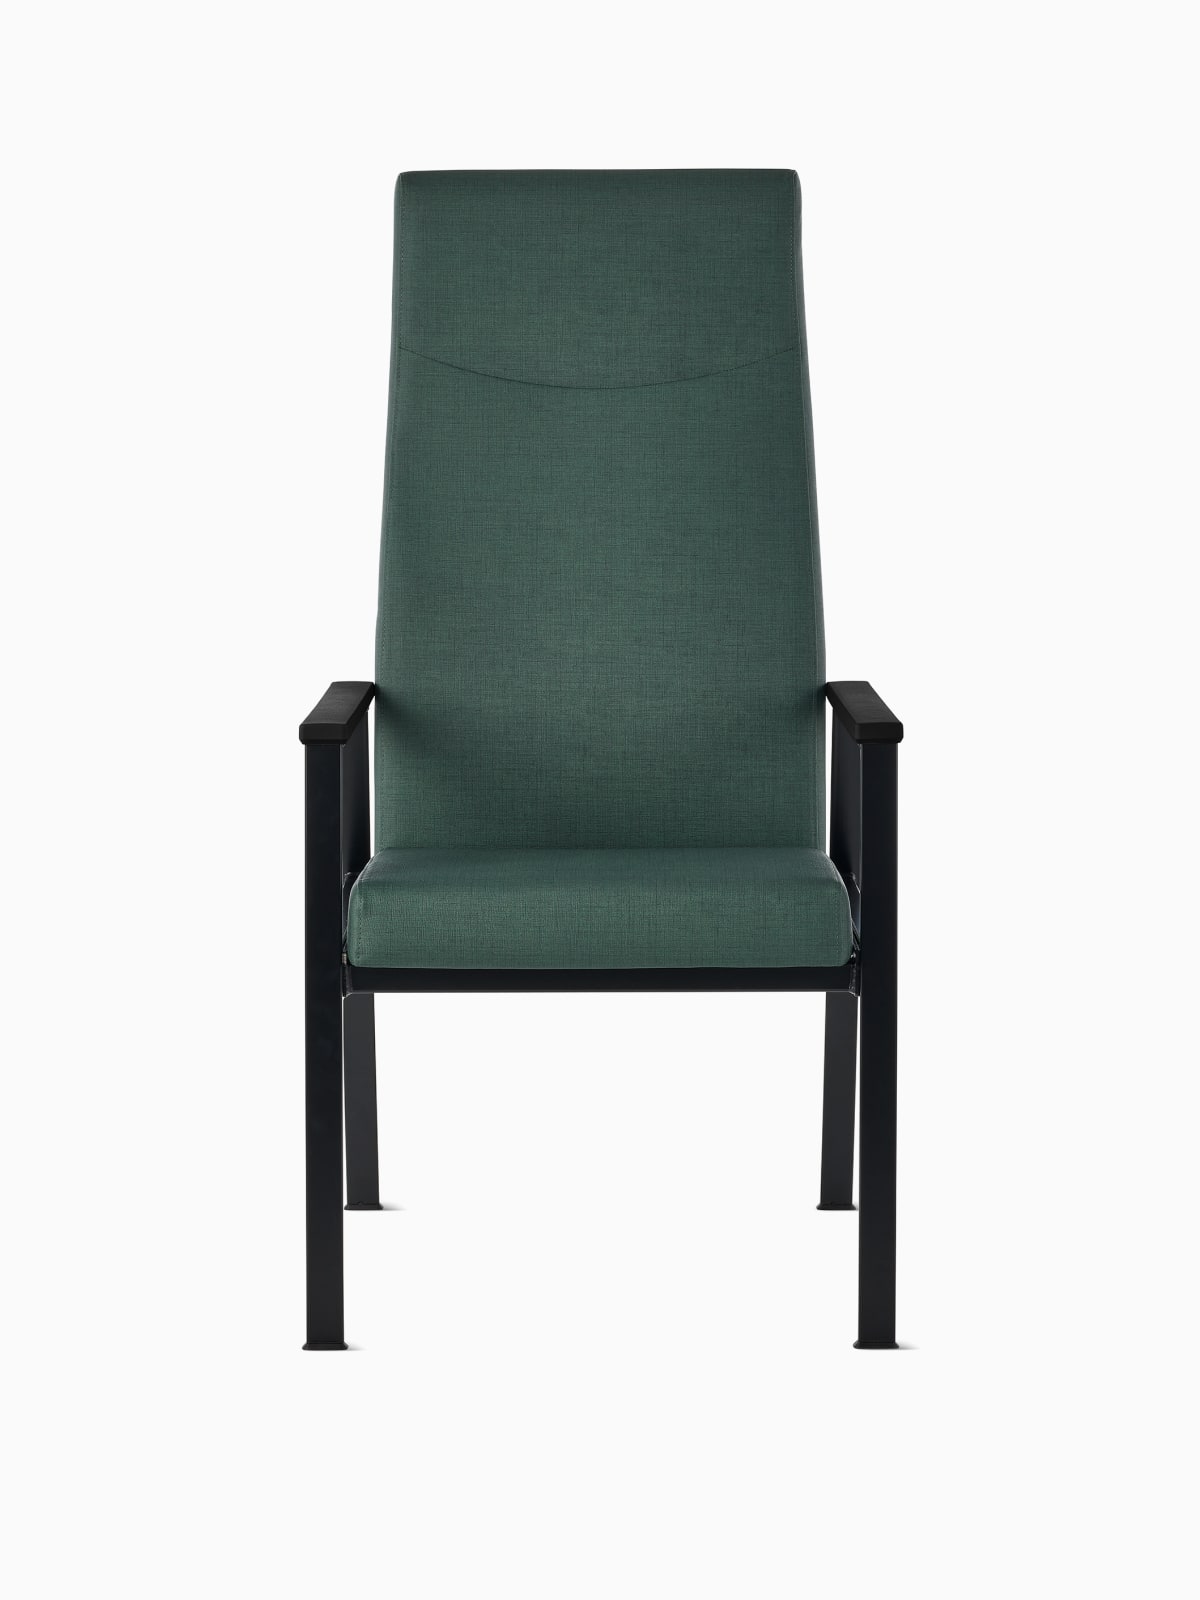 Front view of an Easton Patient Chair with green upholstery, black four-leg base, and black arm caps.